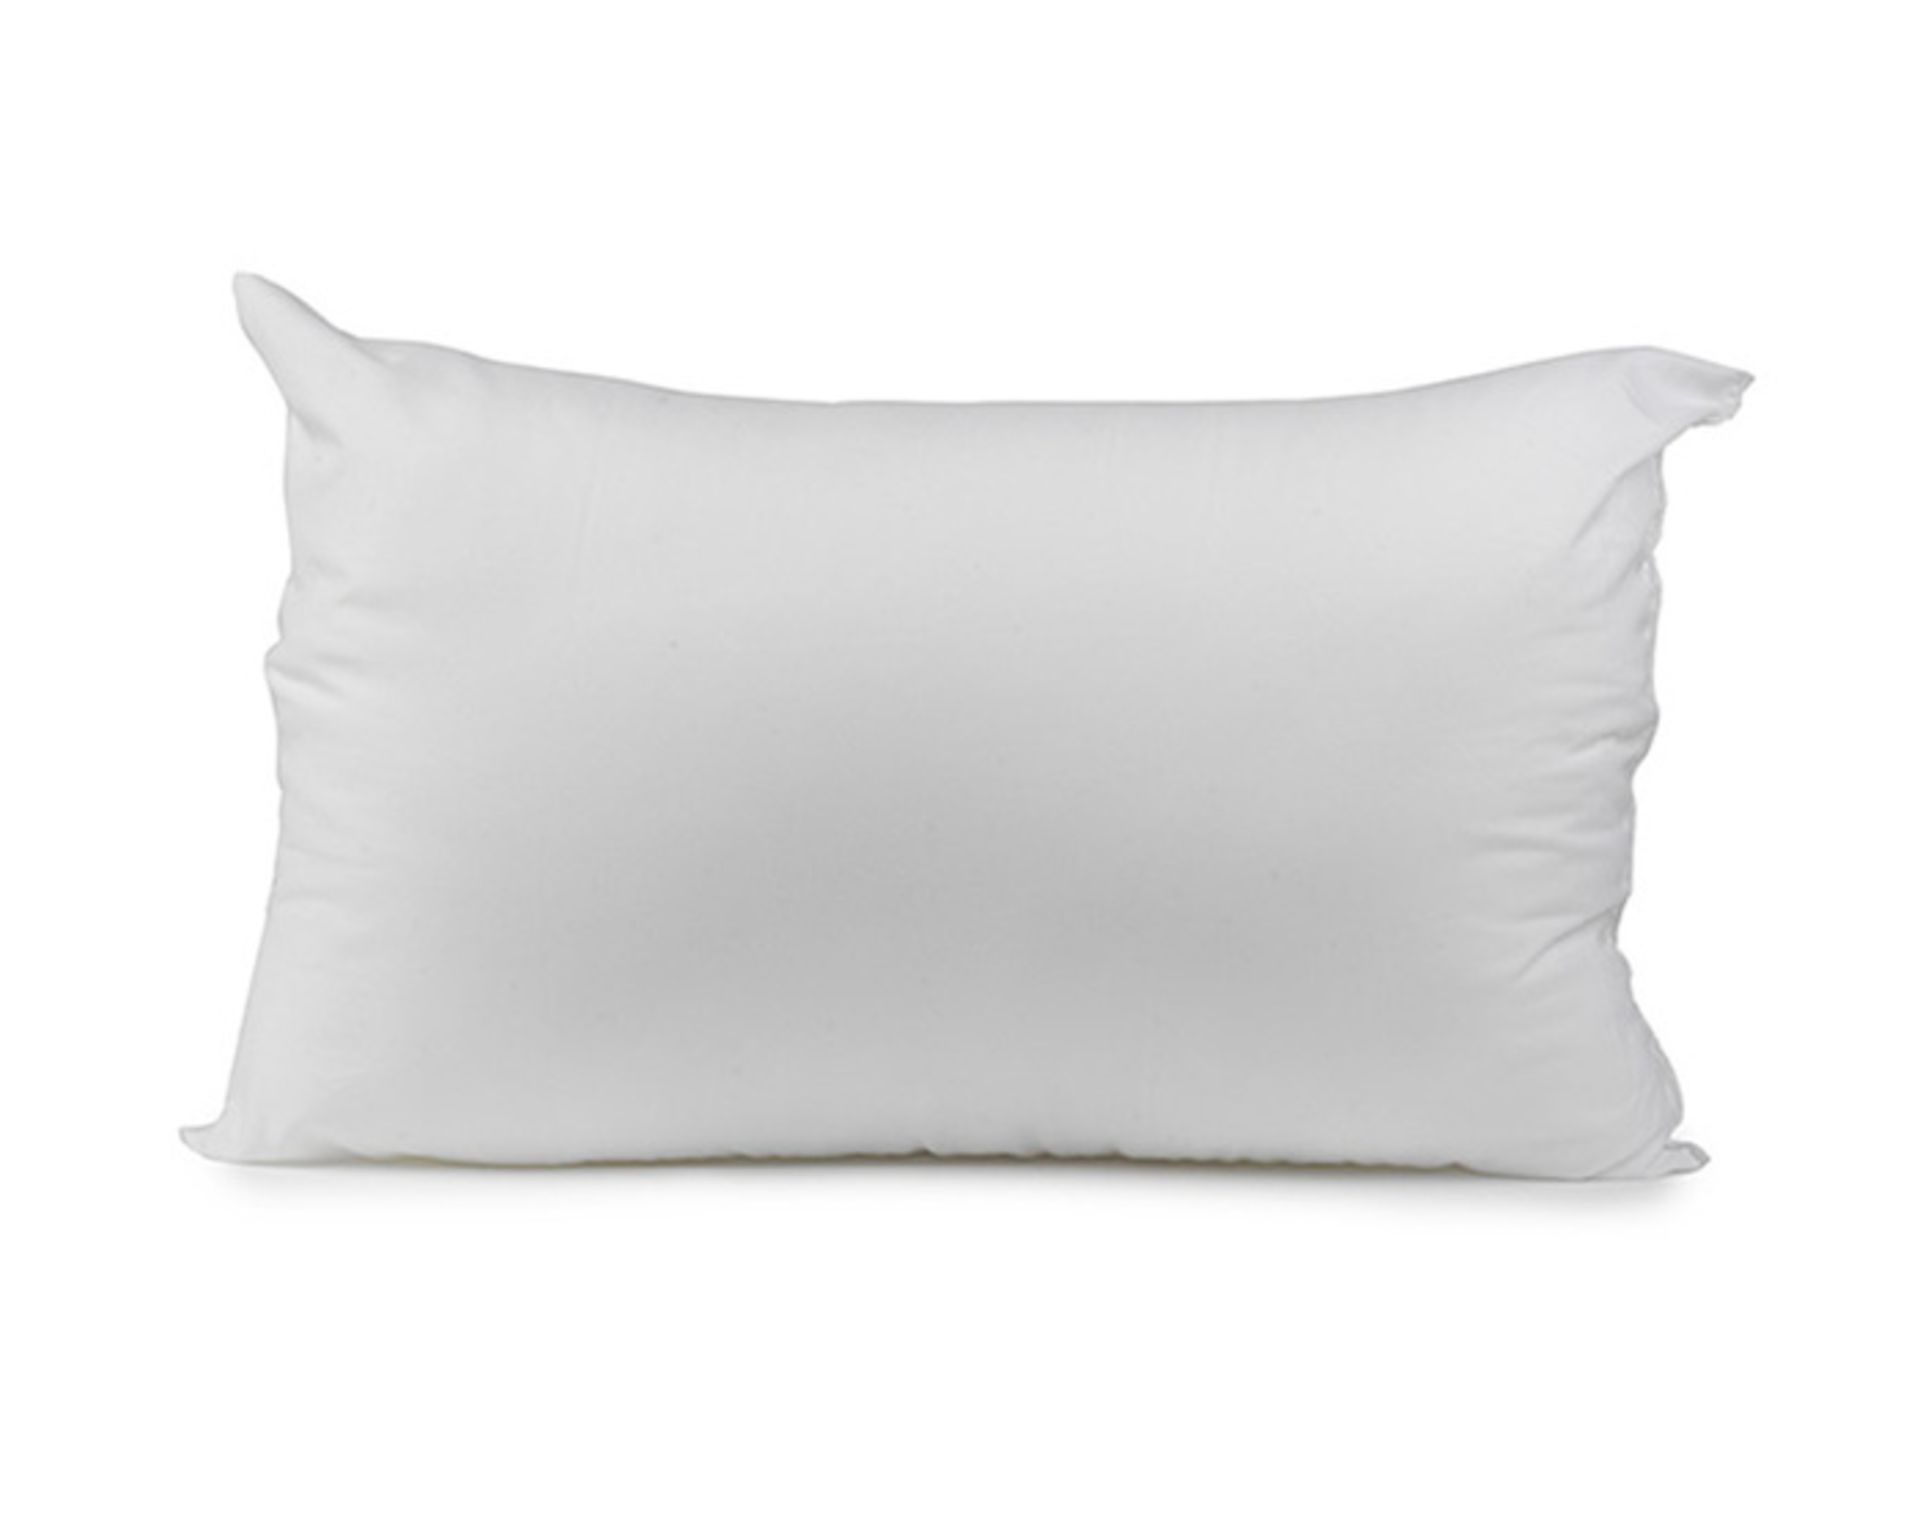 V Brand New Twin Pack Luxury Pillows With Down-Like Filling & Super-Soft Cover. Machine Washable